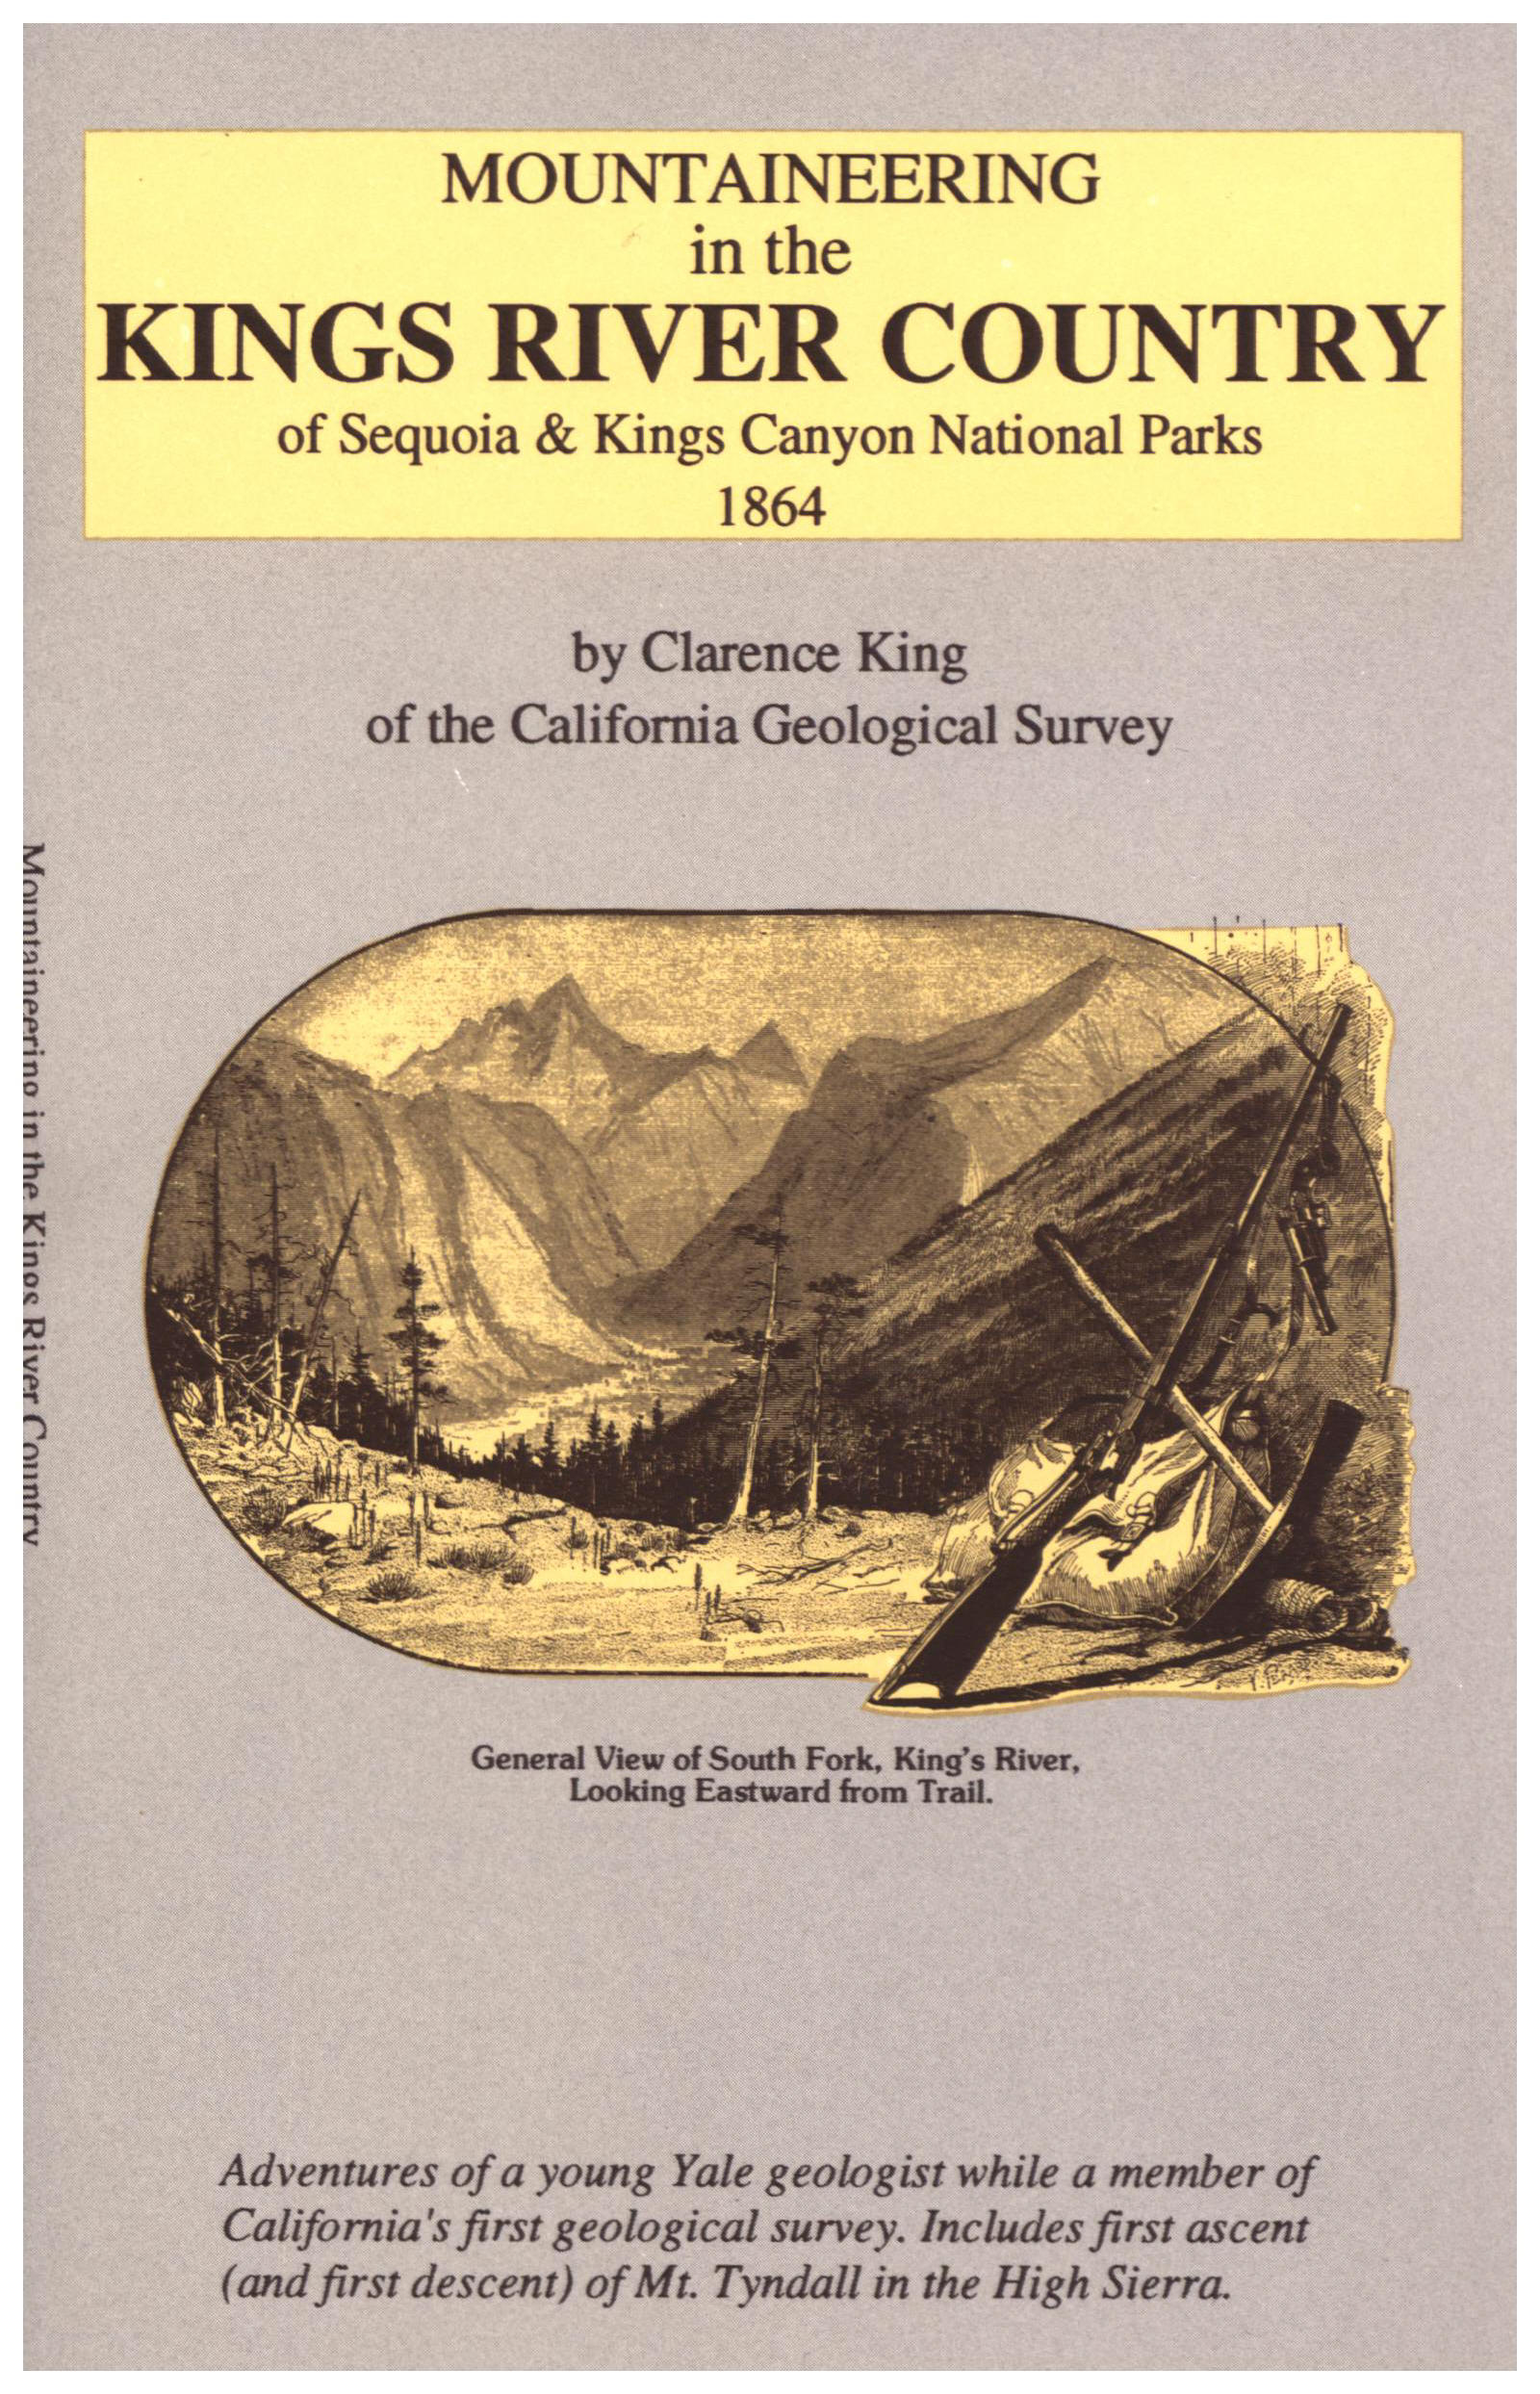 MOUNTAINEERING IN THE KINGS RIVER COUNTRY, 1864 (CA).